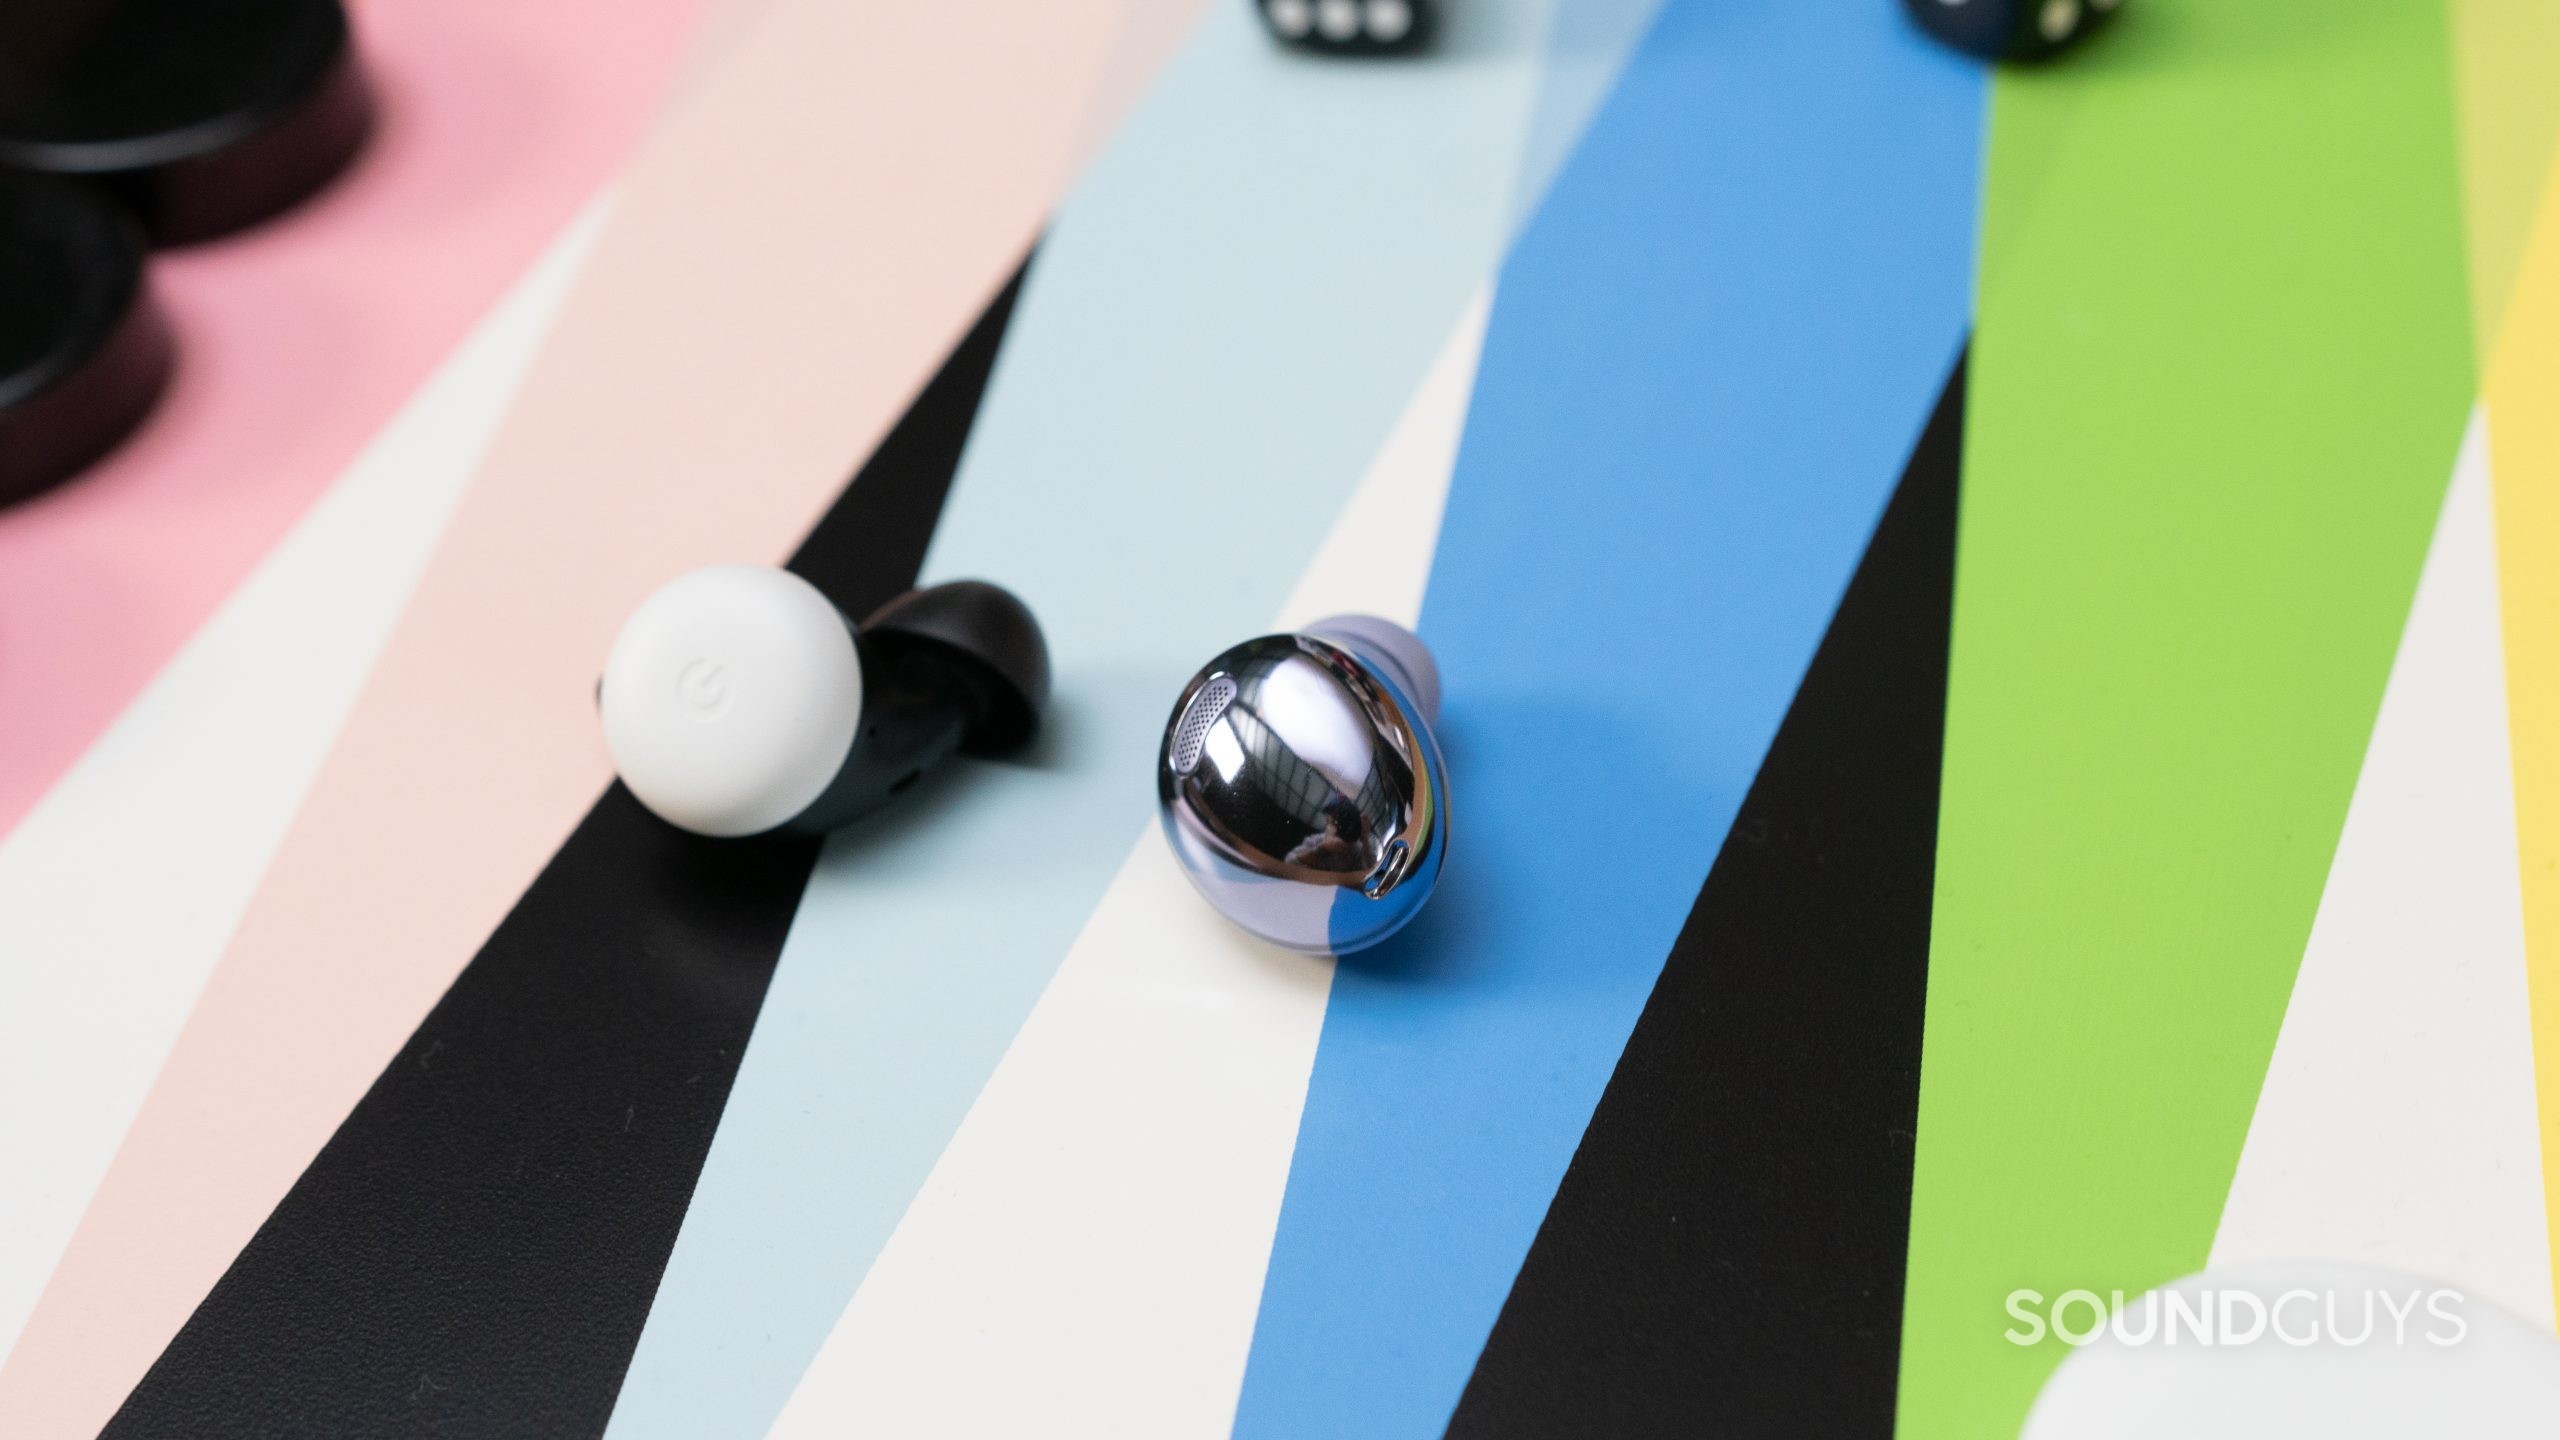 The Samsung Galaxy Buds Pro in violet on a gameboard next to a single Pixel Bud,